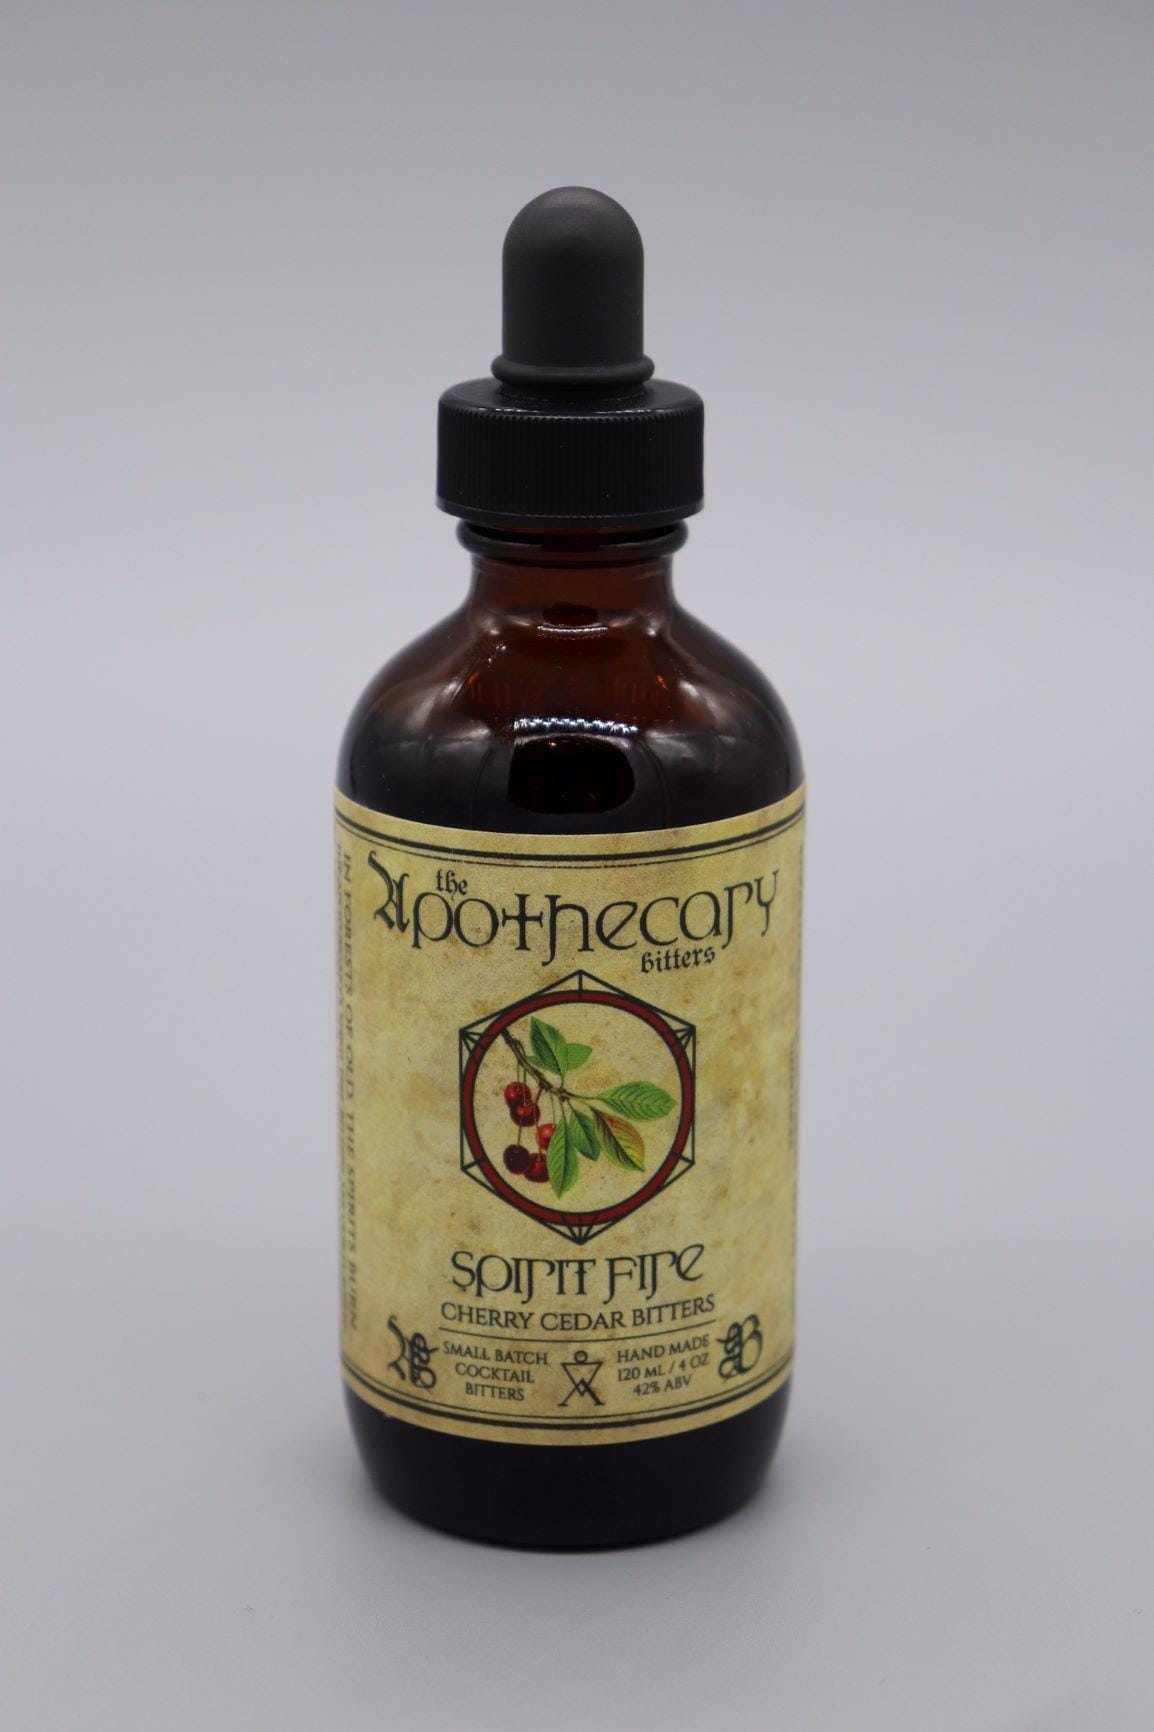 Apothecary Spiritfire Bitters